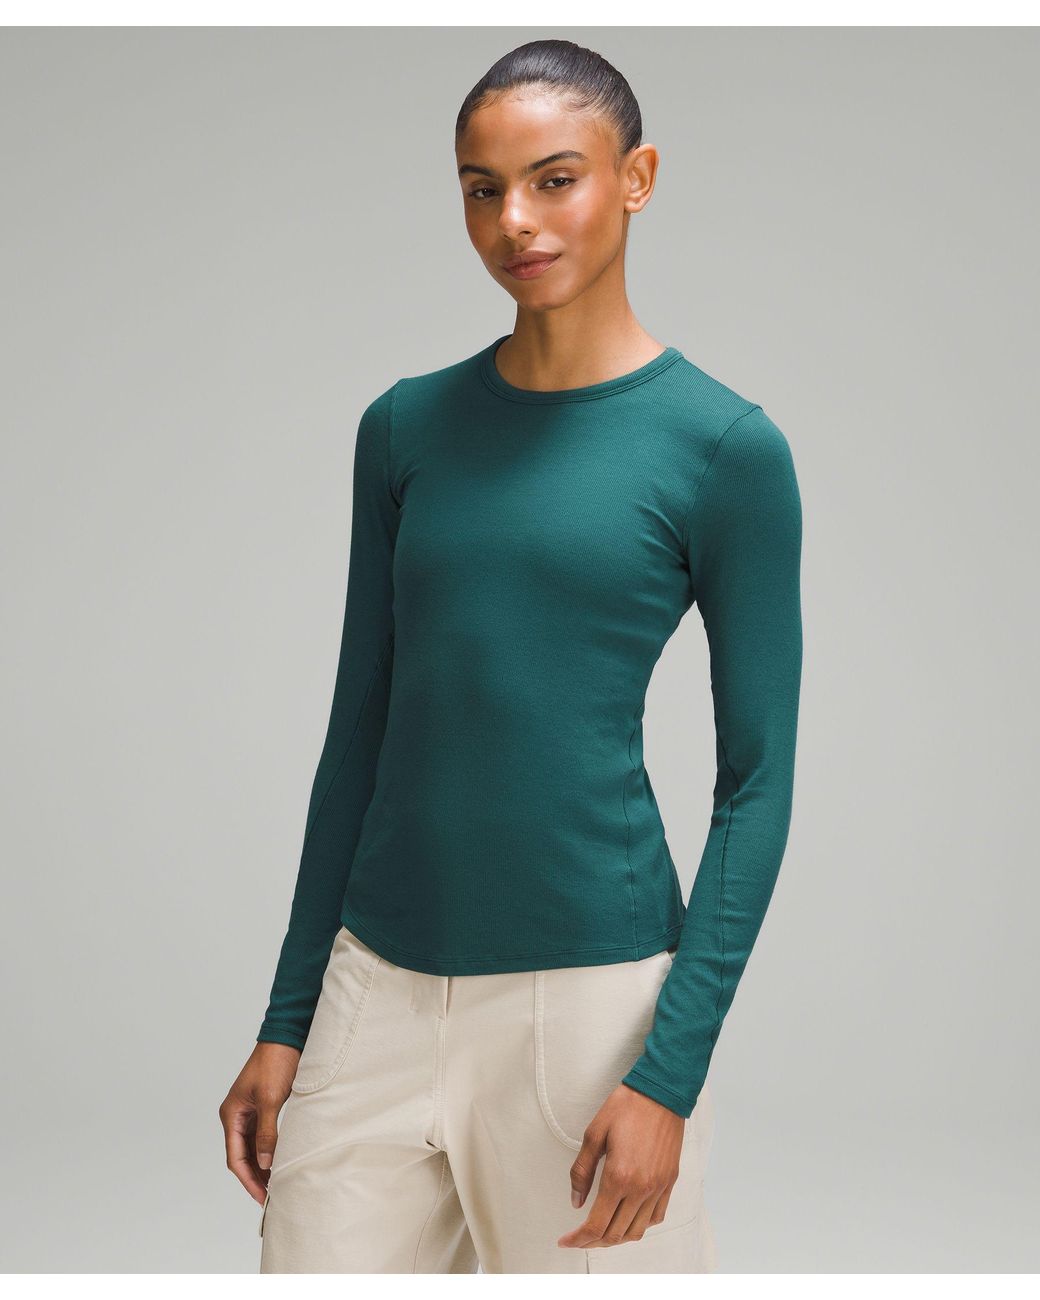 lululemon athletica Hold Tight Long-sleeve Shirt - Color Green - Size 20